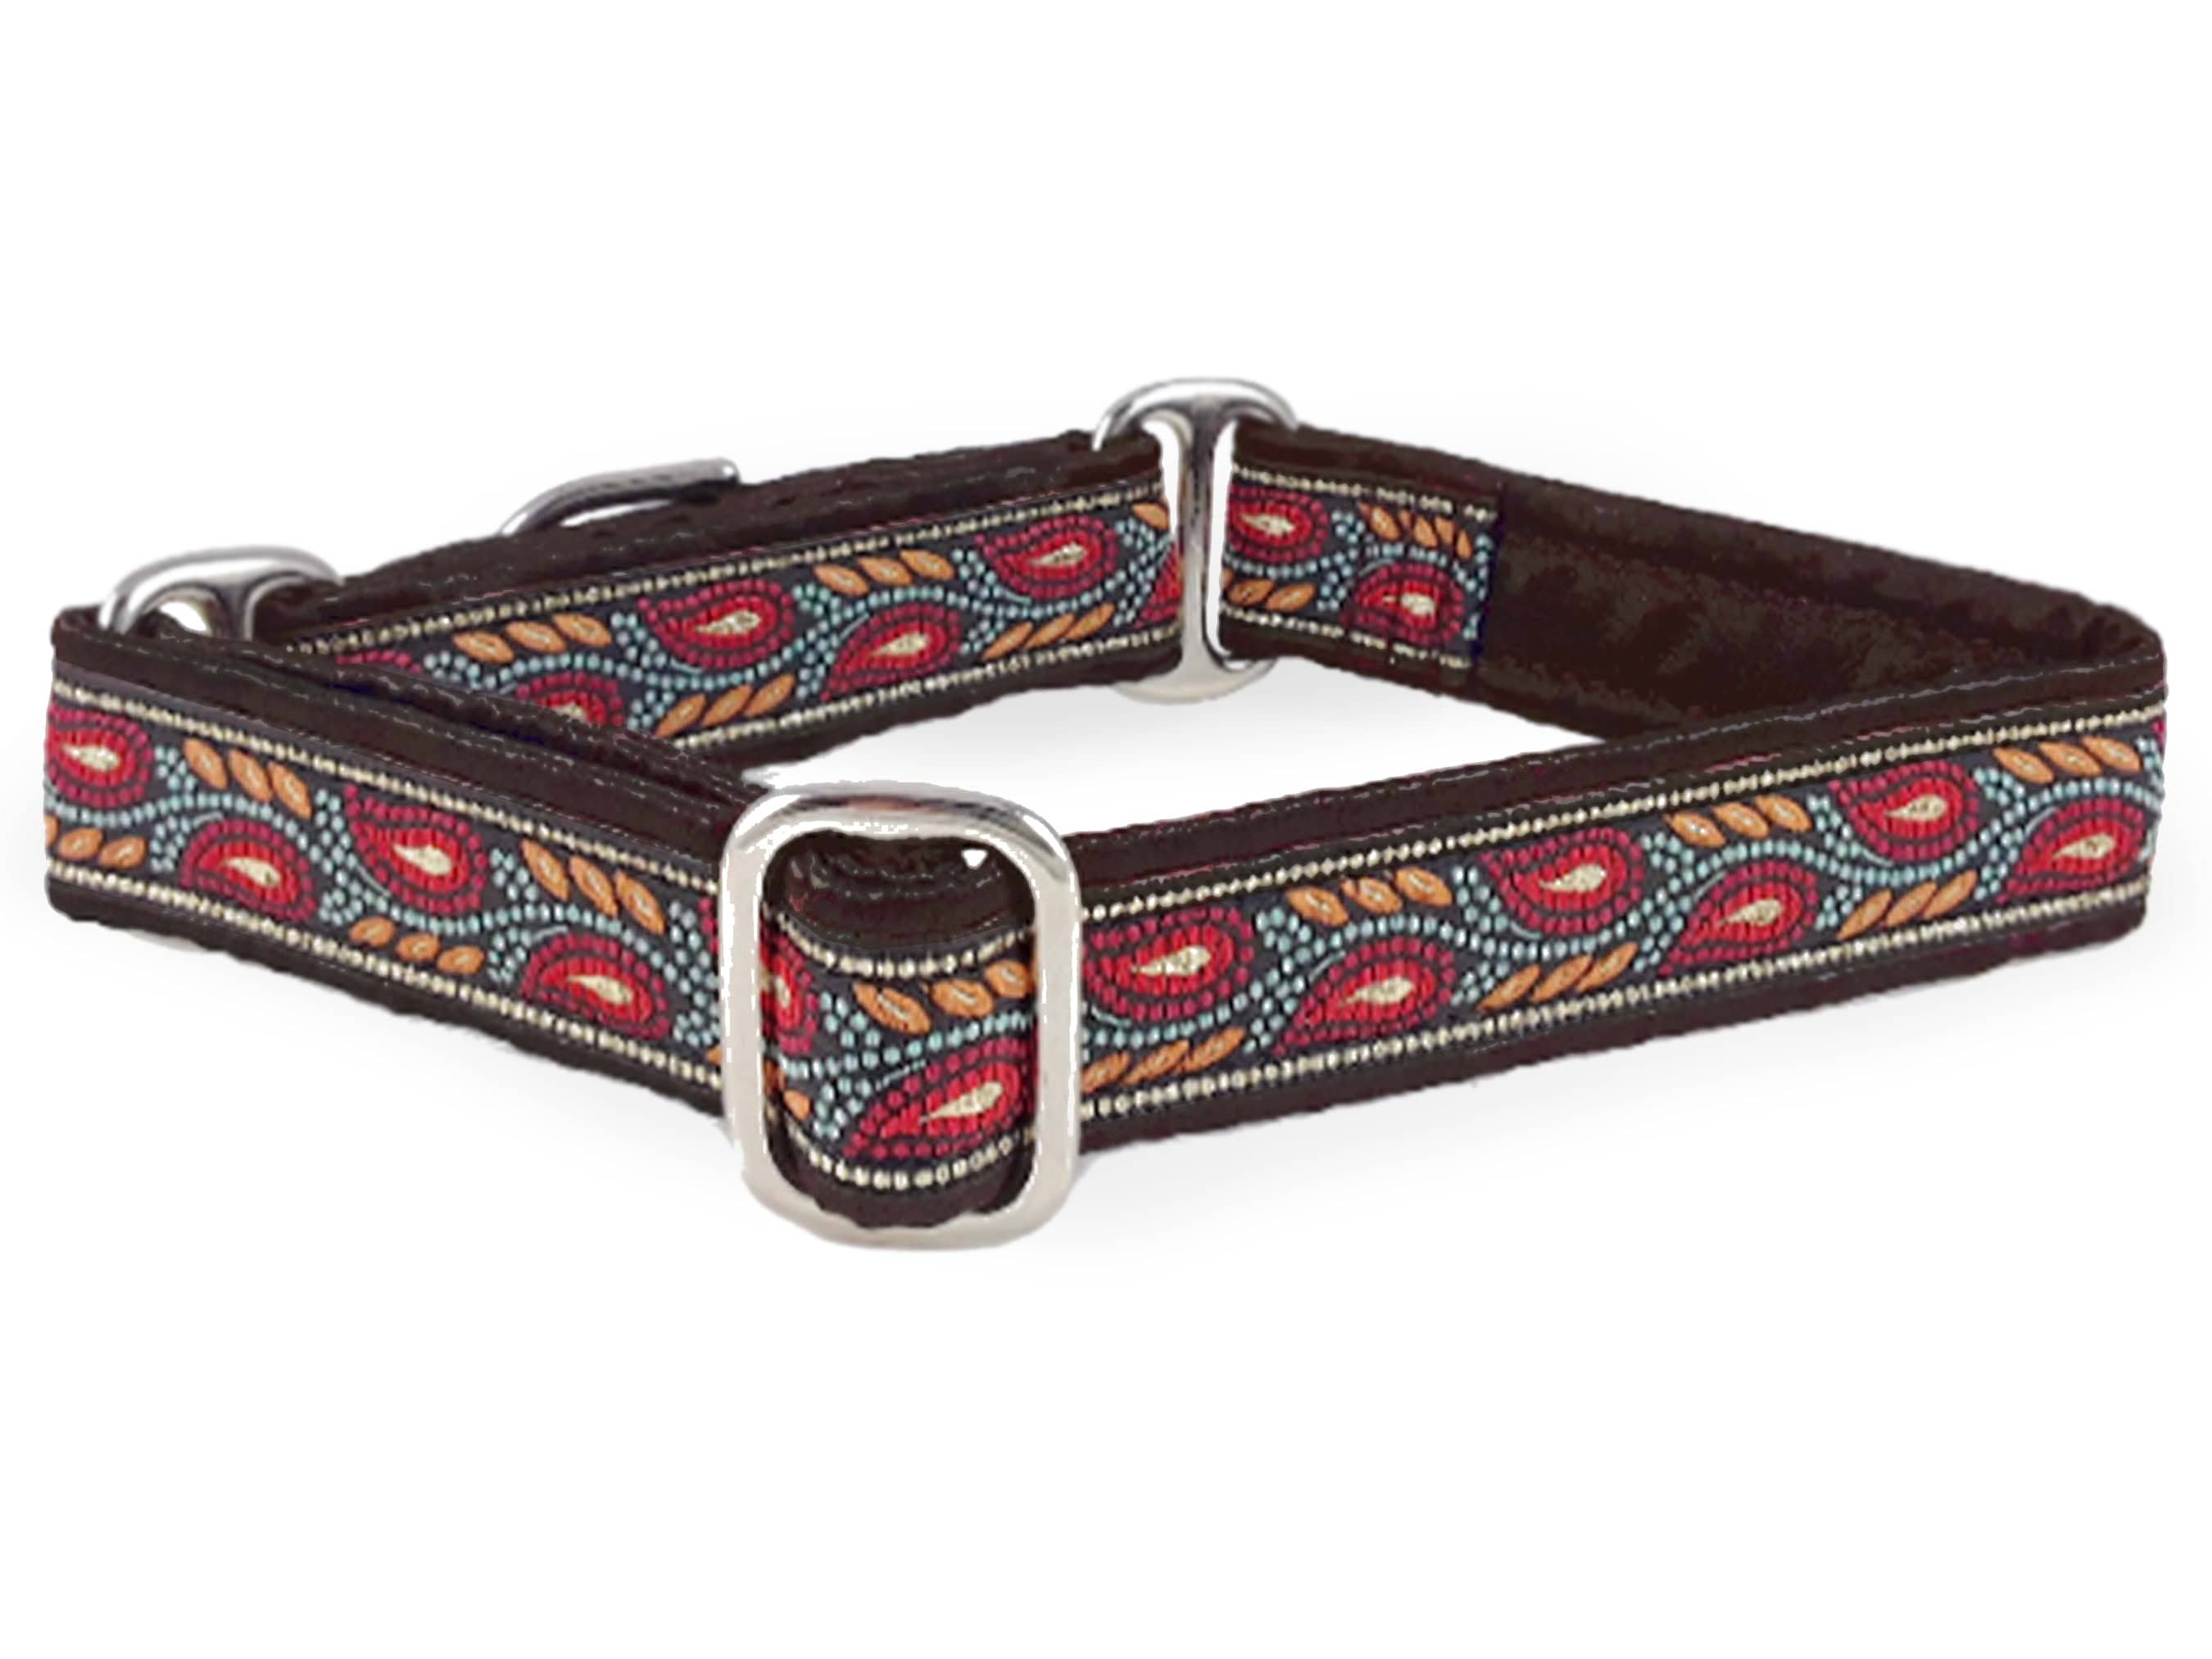 The Hound Haberdashery Collar Paisley Mosaic Vines Jacquard in Brown & Red - Martingale Dog Collar or Buckle Dog Collar - 1" Width